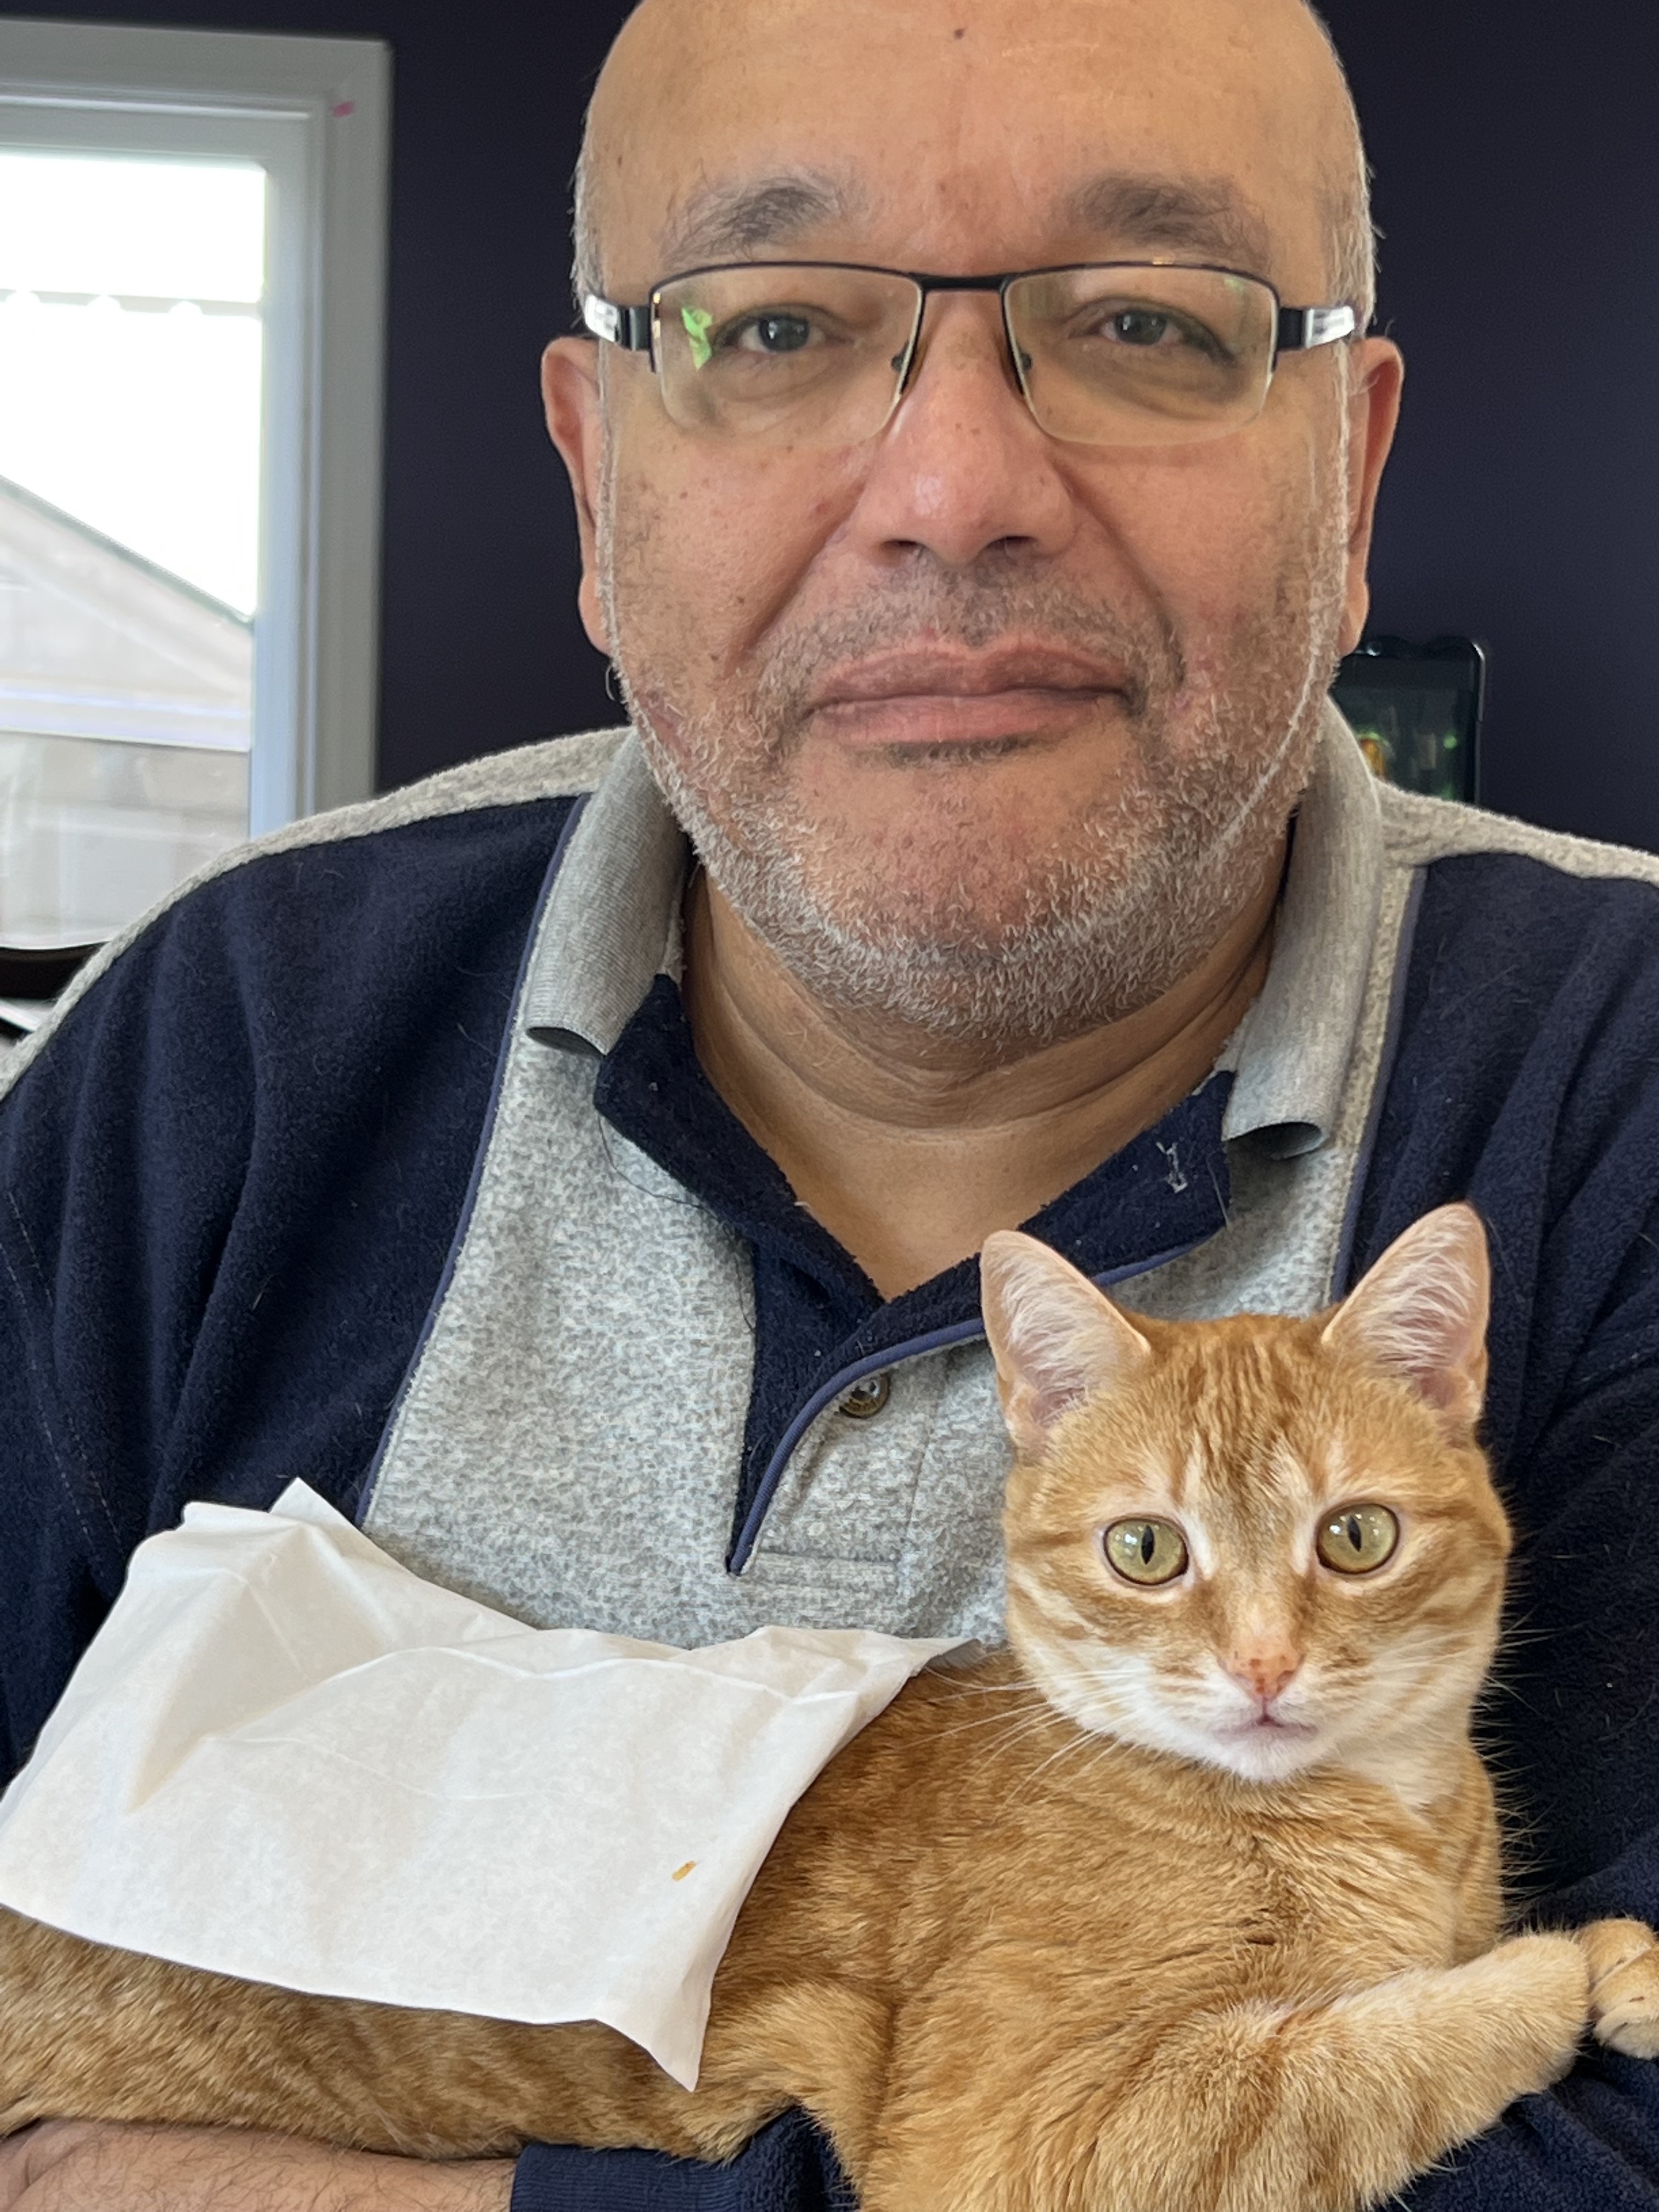 Always keeps me company while eating, I had to cover her with Kleenex so food won't drip on her fur. - Hesham Abdel Al